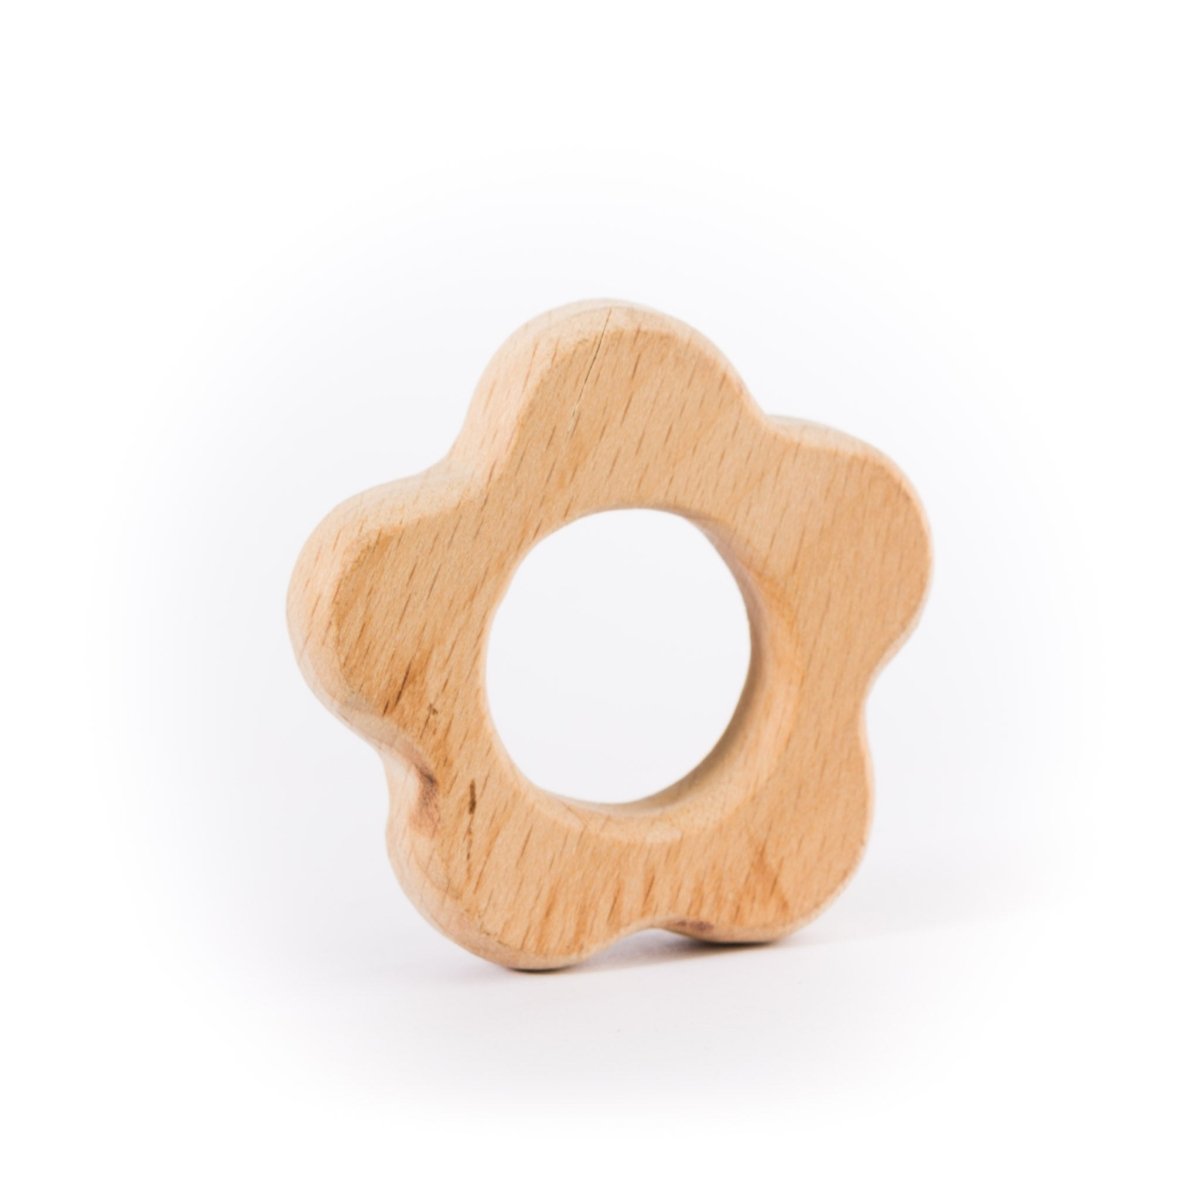 Wood Rings & Pendants Small - Beech Wood Flower from Cara & Co Craft Supply